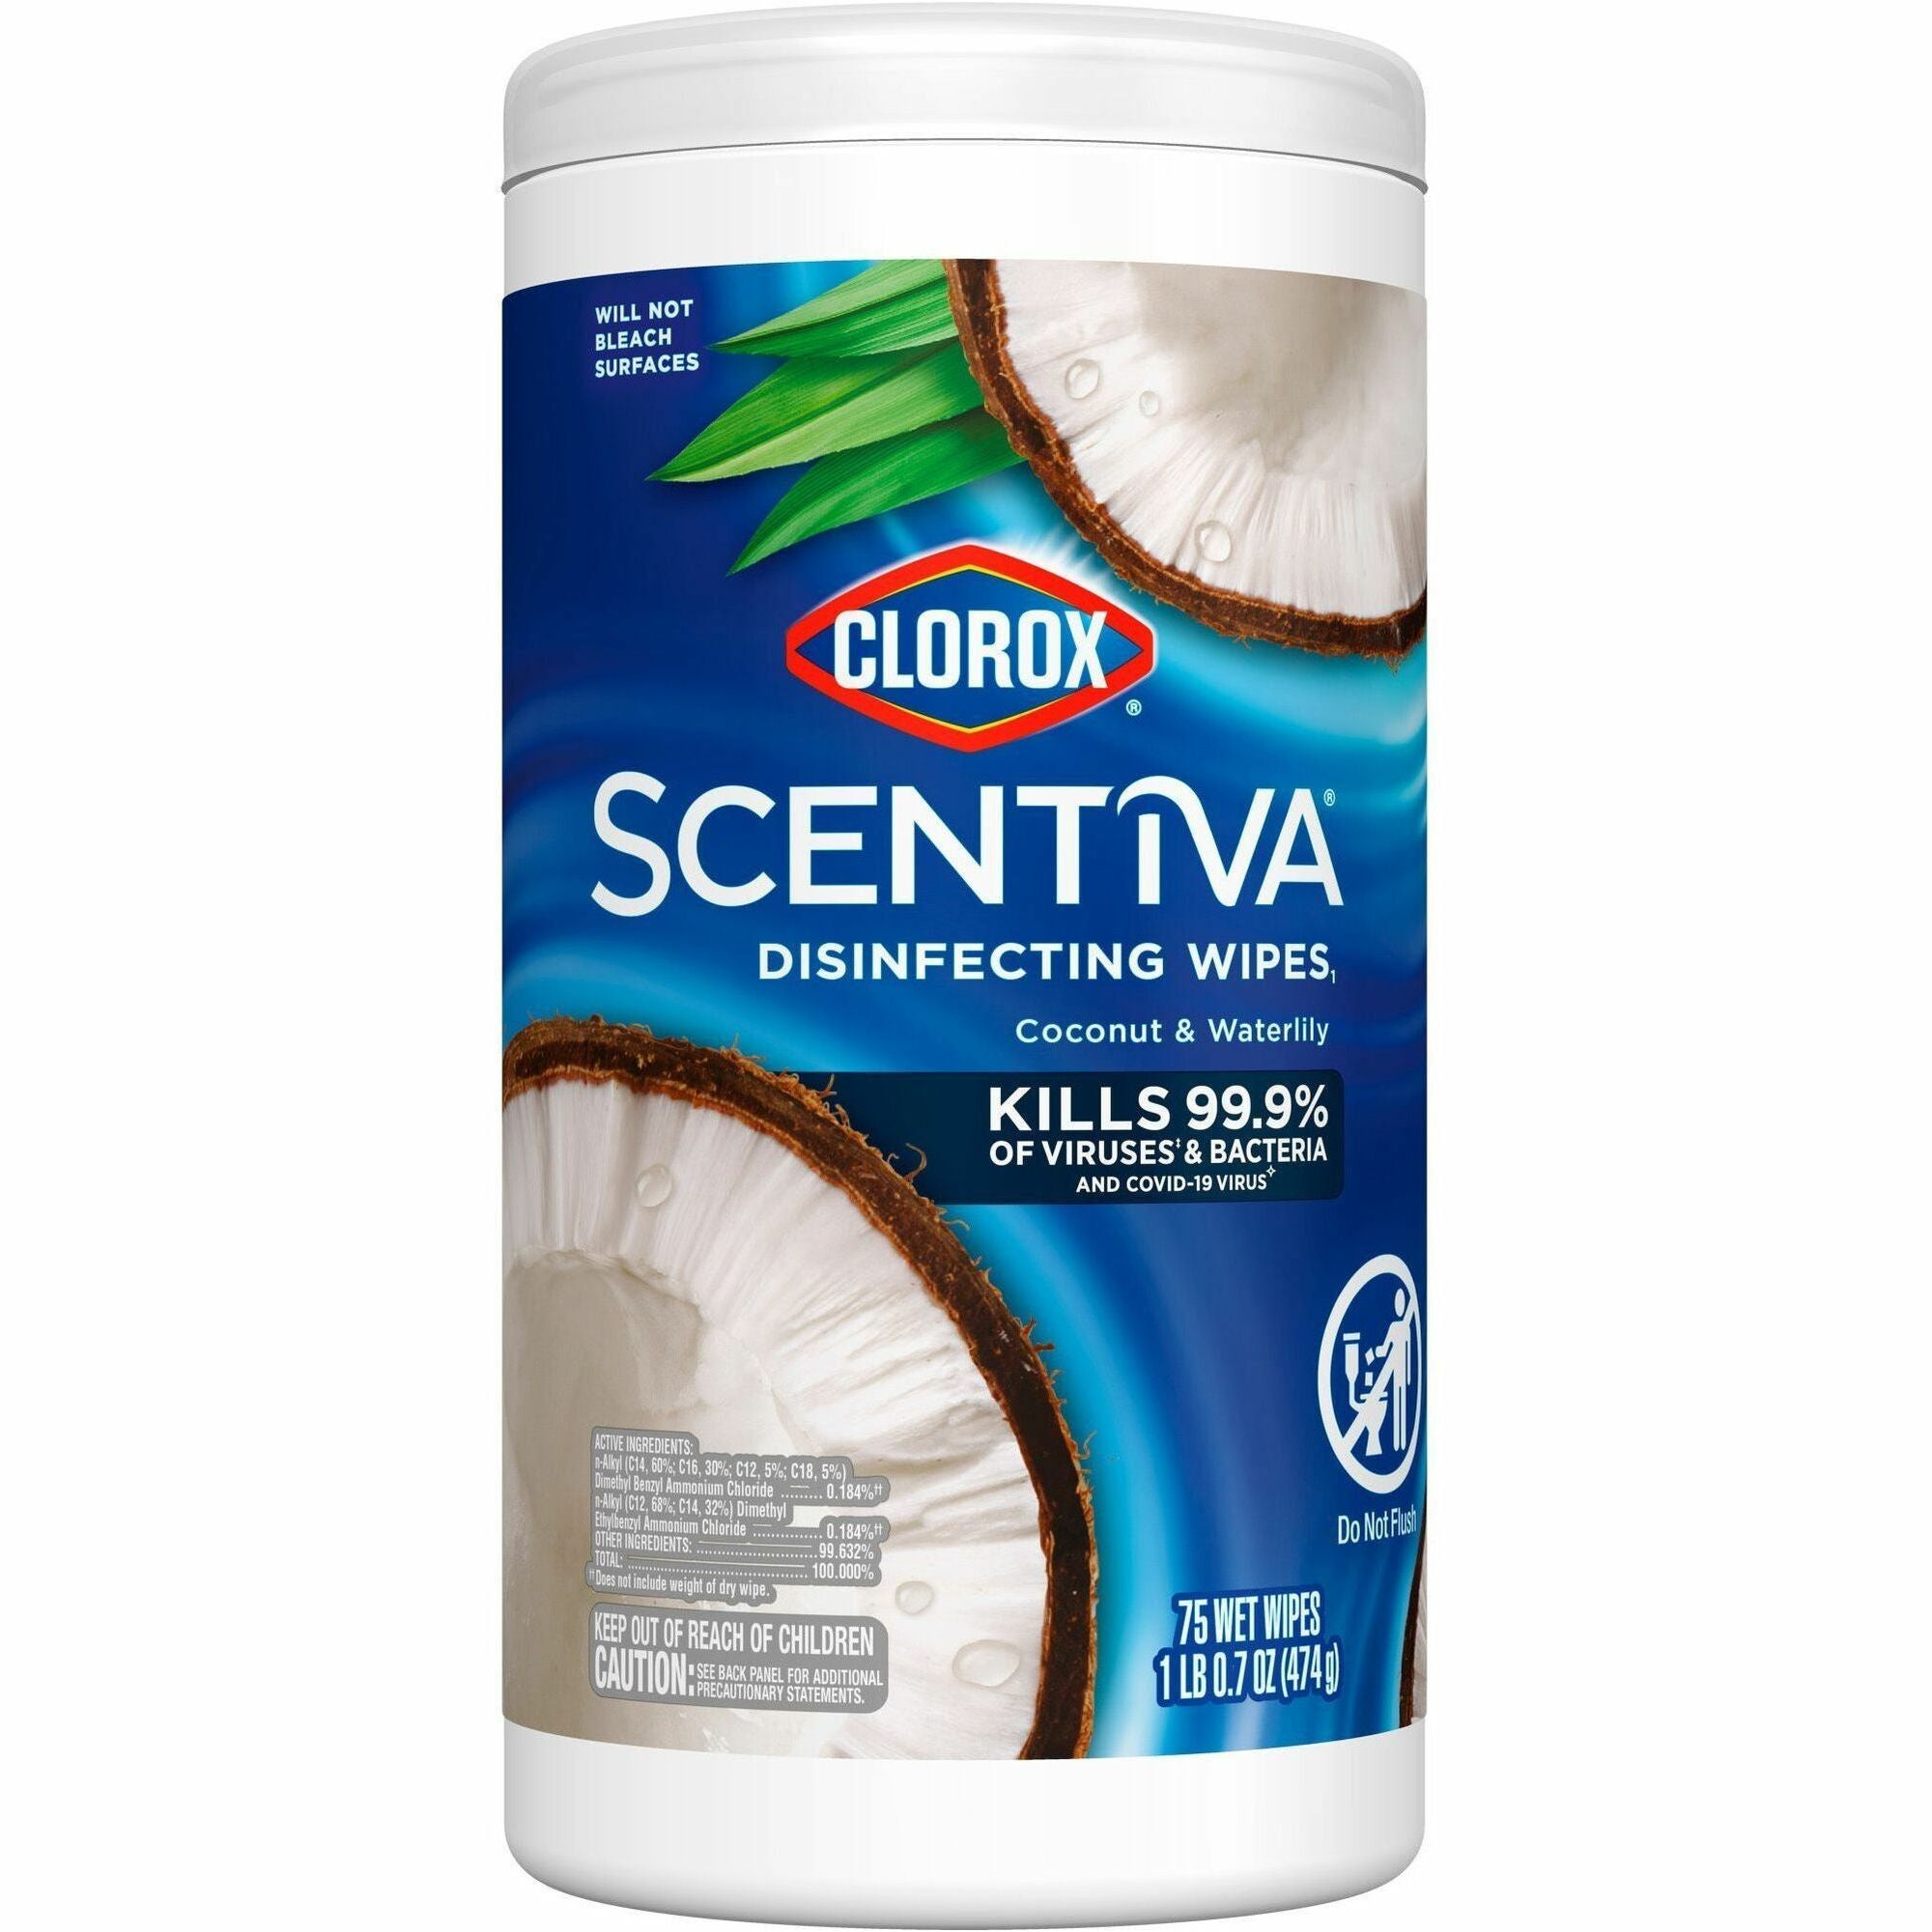 Clorox Scentiva Wipes, Bleach Free Cleaning Wipes - Ready-To-Use - Pacific Breeze & Coconut Scent - 75 / Canister - 1 Each - Bleach-free, Disinfectant, Deodorize - White - 1